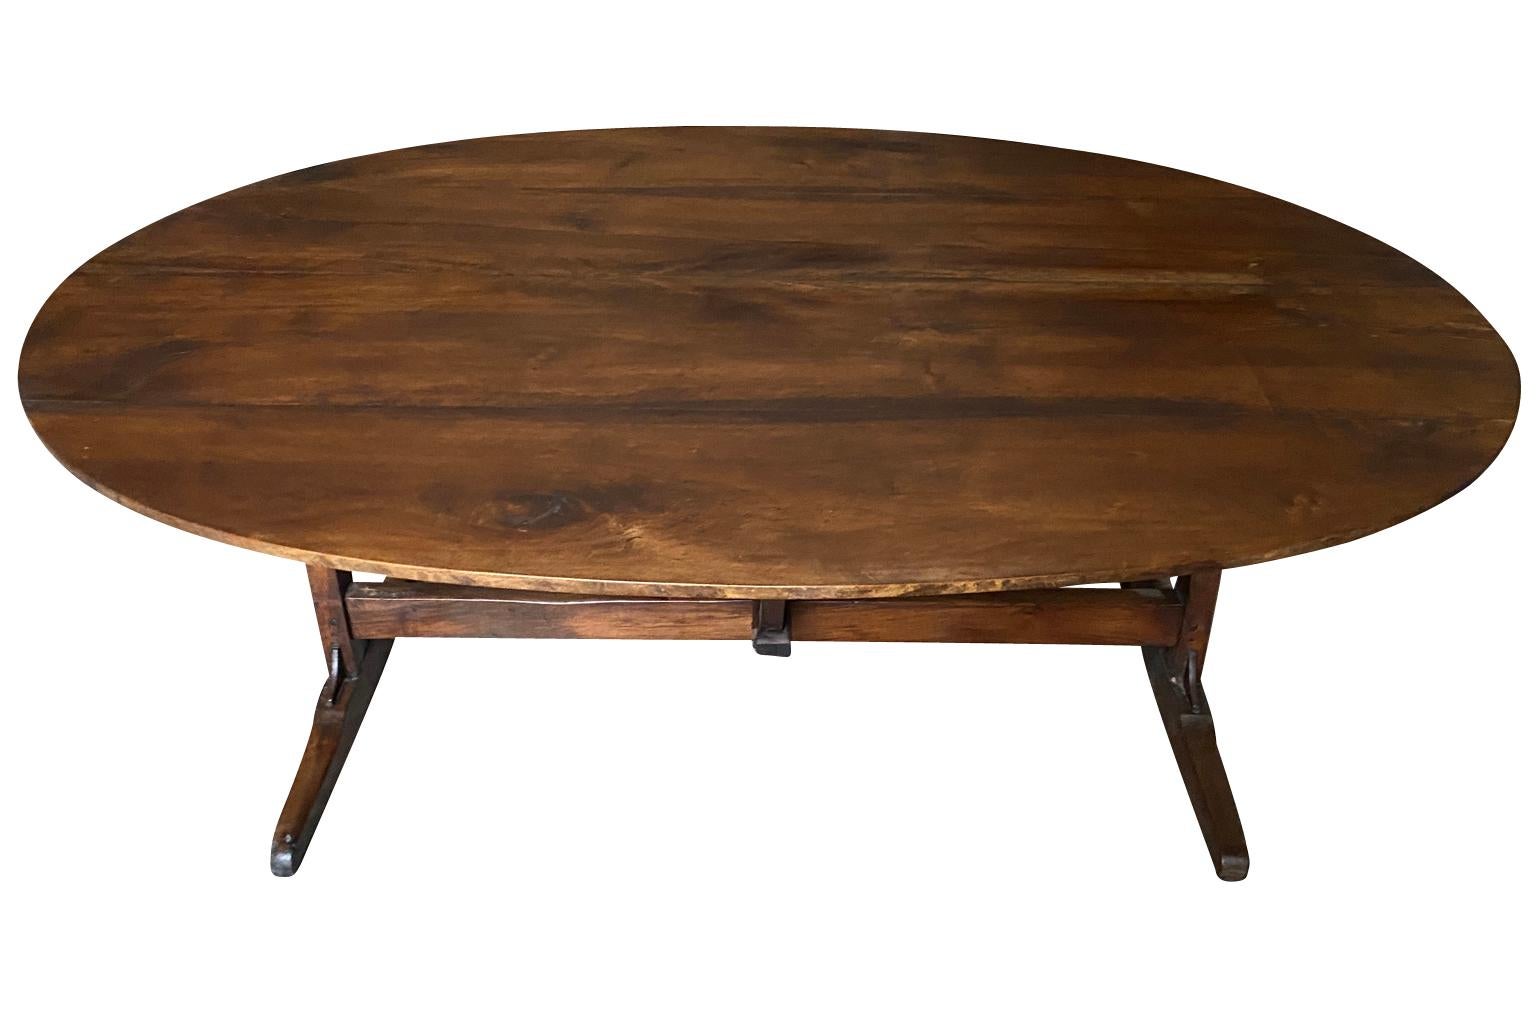 A very handsome mid-19th century oval shaped Wine Tasting Table - Table Vigneron - from the Provence region of France.  Beautifully constructed from handsome walnut with a tilting top.  Perfect as a relaxed dining table.  Wonderful patina.